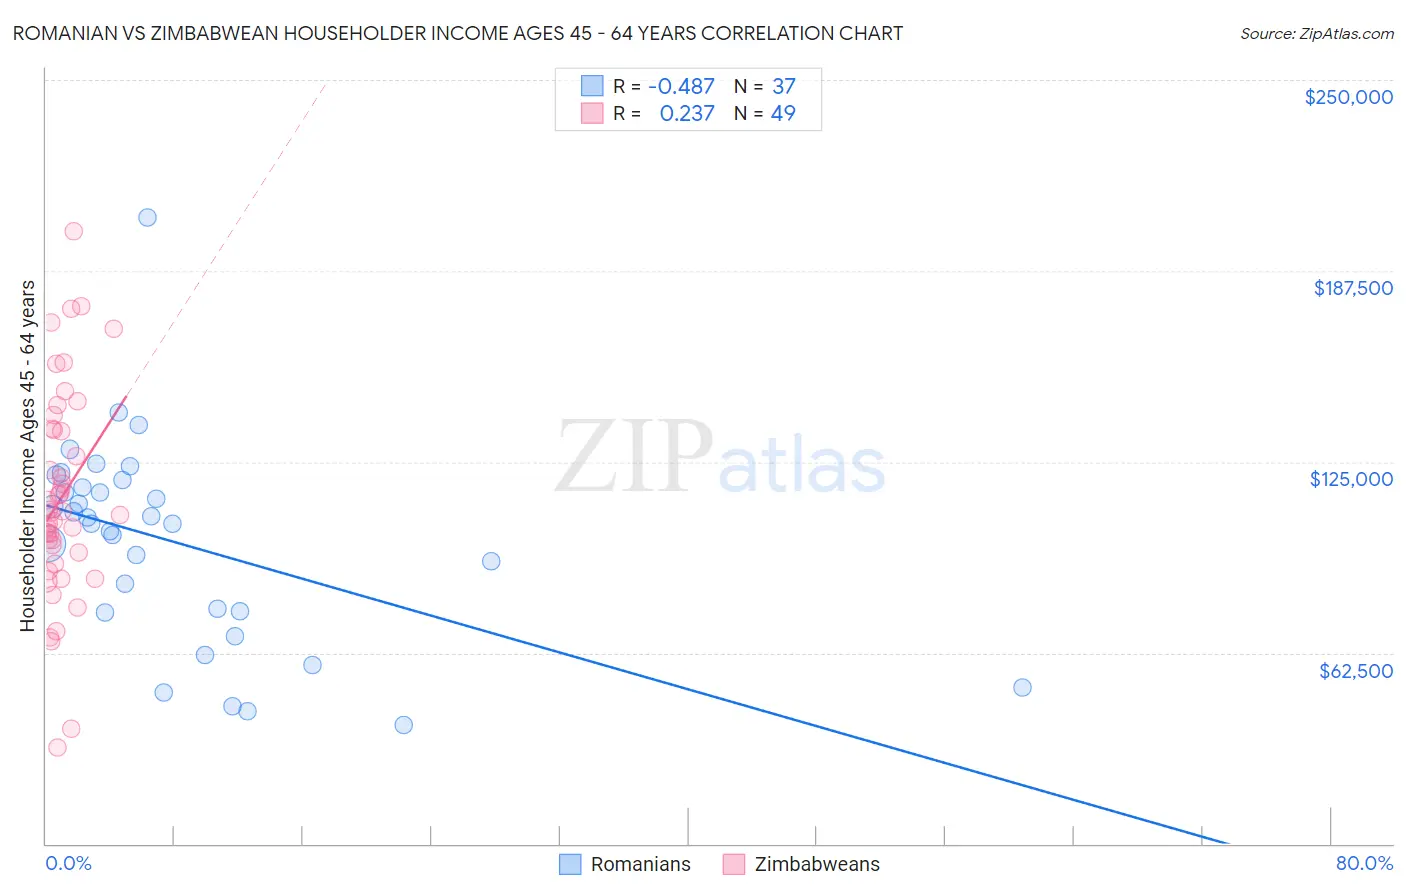 Romanian vs Zimbabwean Householder Income Ages 45 - 64 years